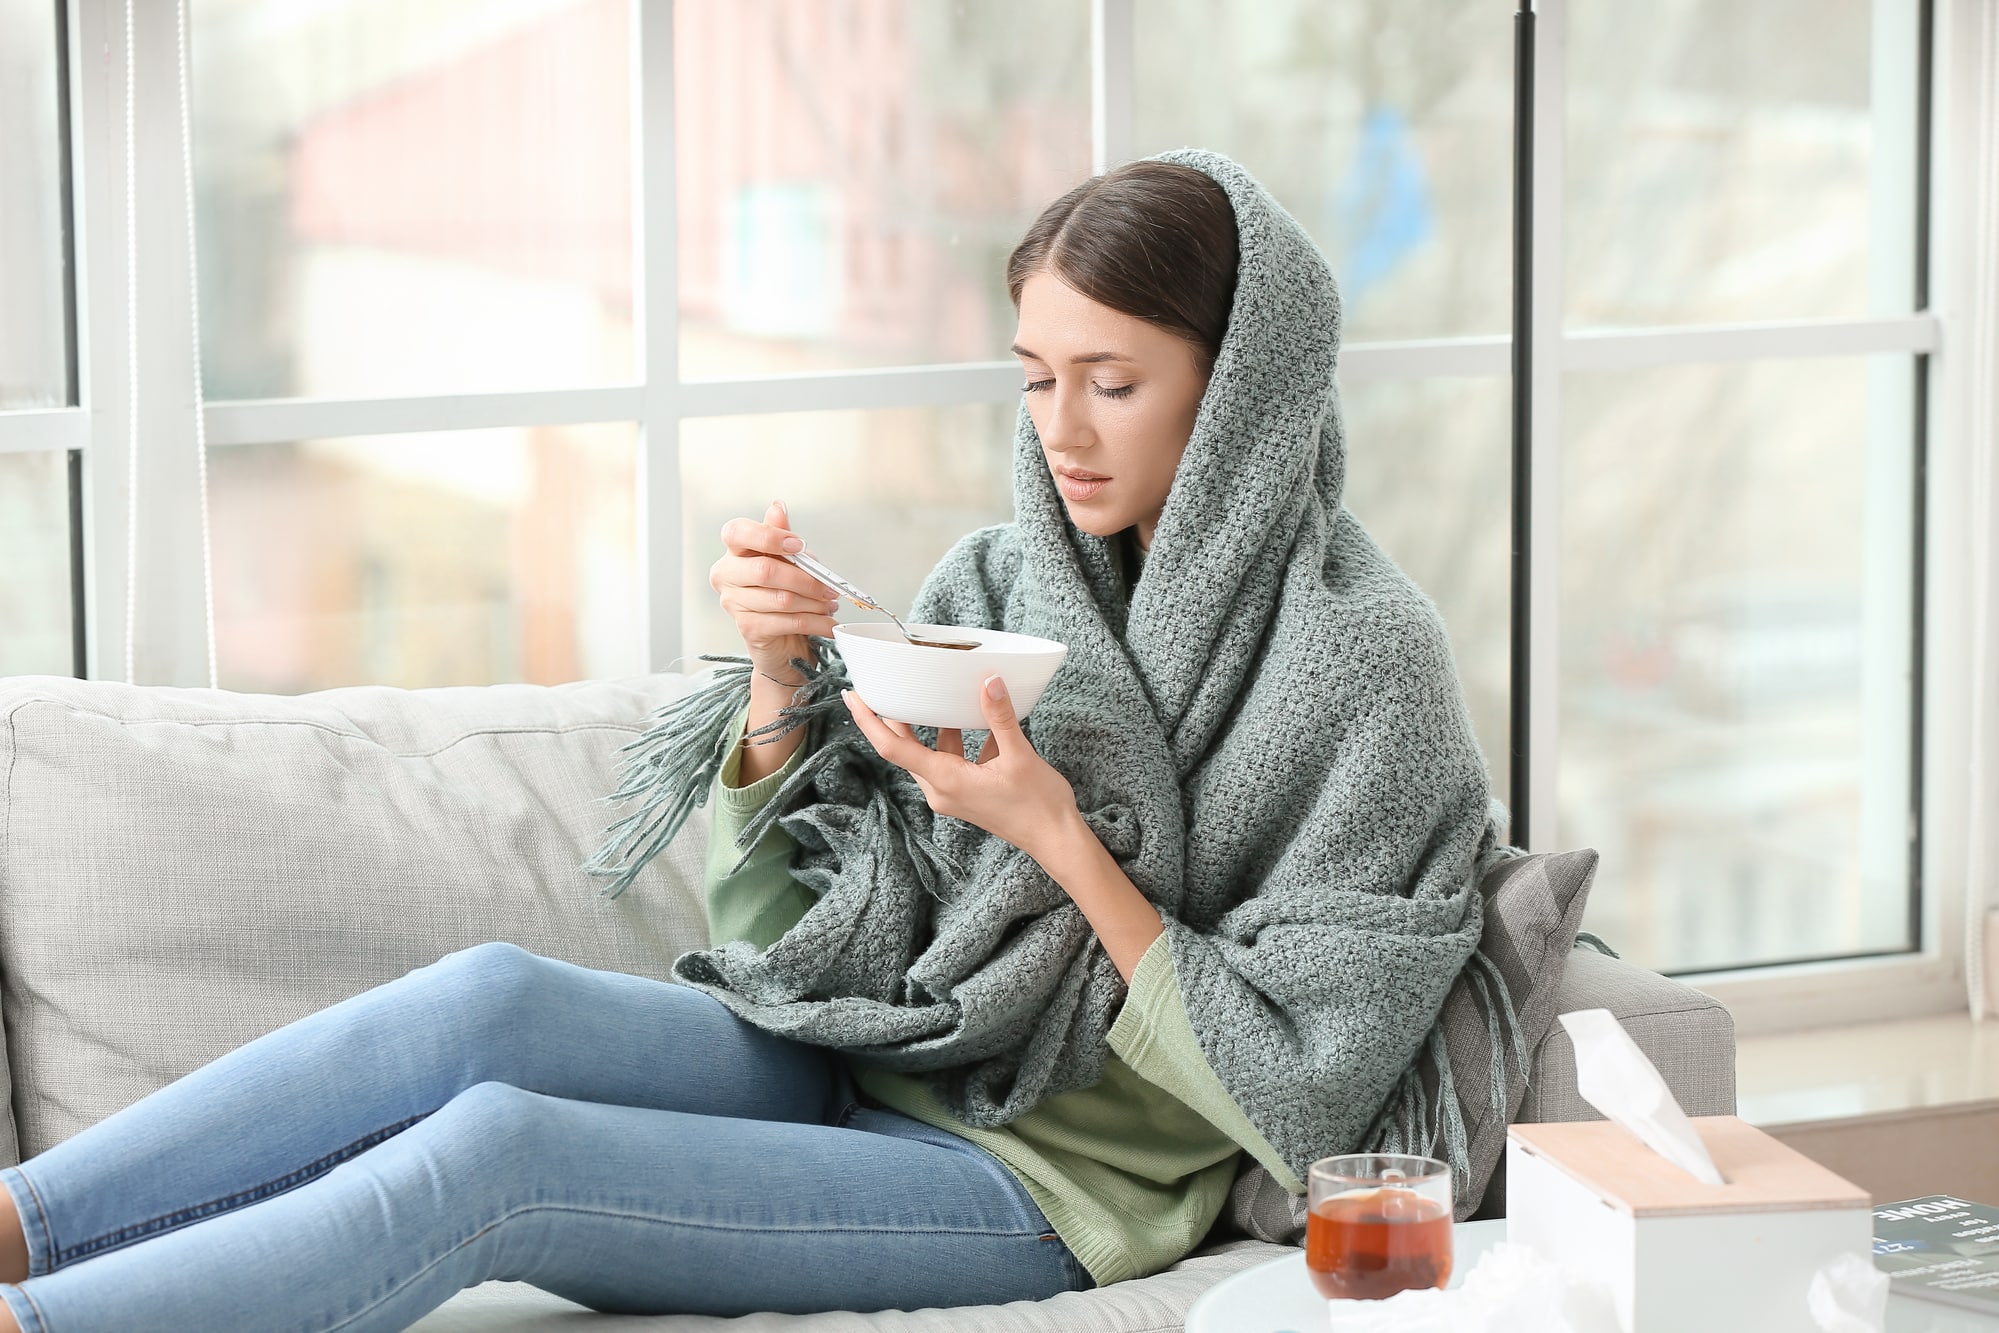 Sick young woman eating chicken soup while wrapped in a blanket on the couch.